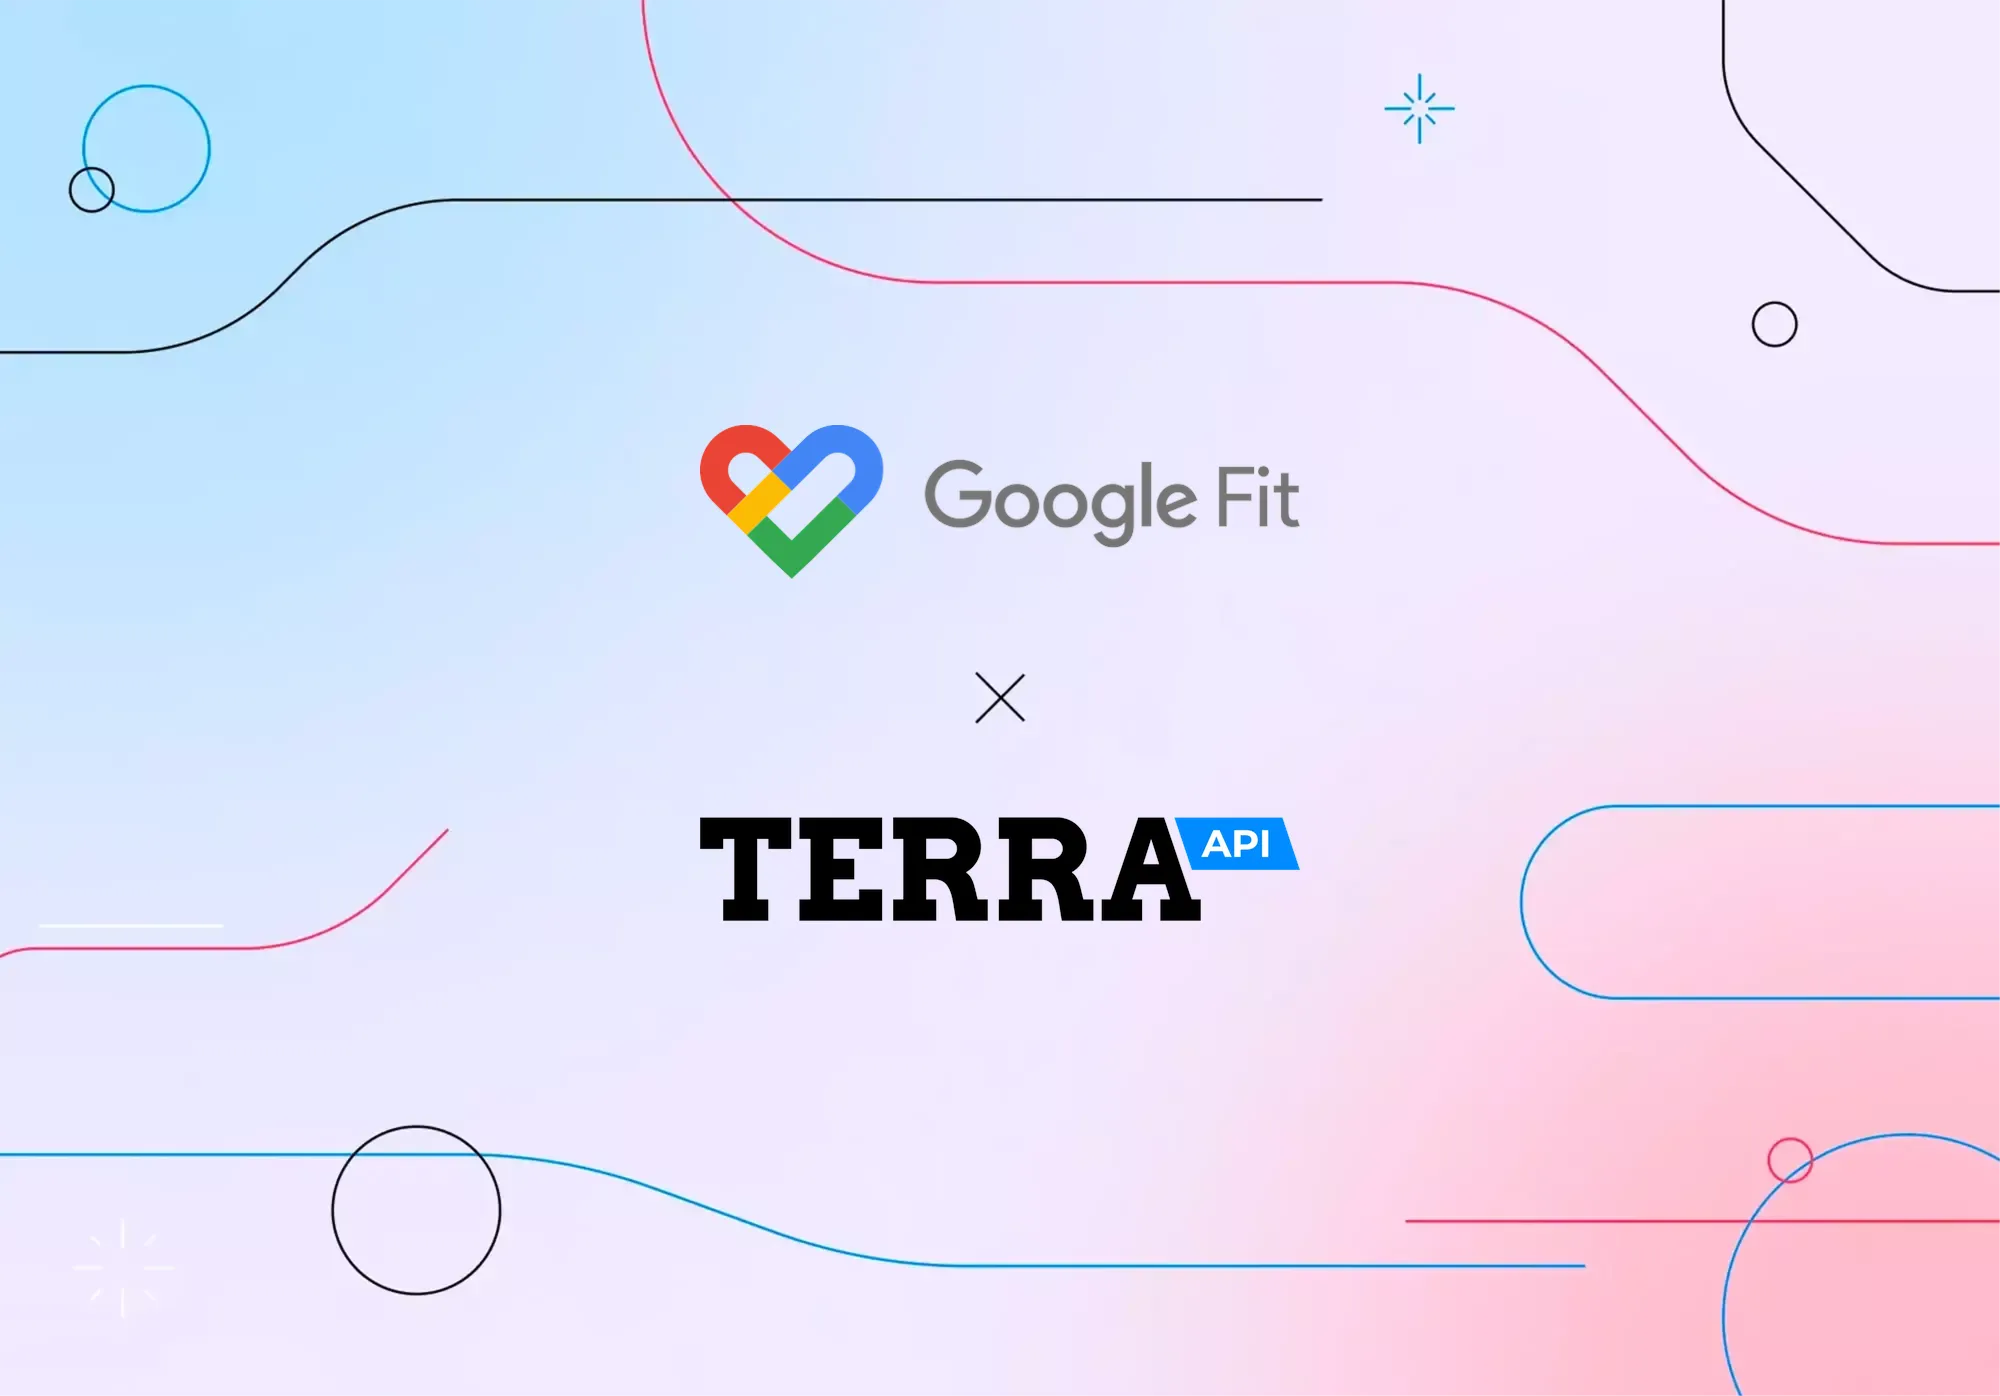 Google Fit API Integration - Easily integrate through the Terra API to  connect to any wearable device